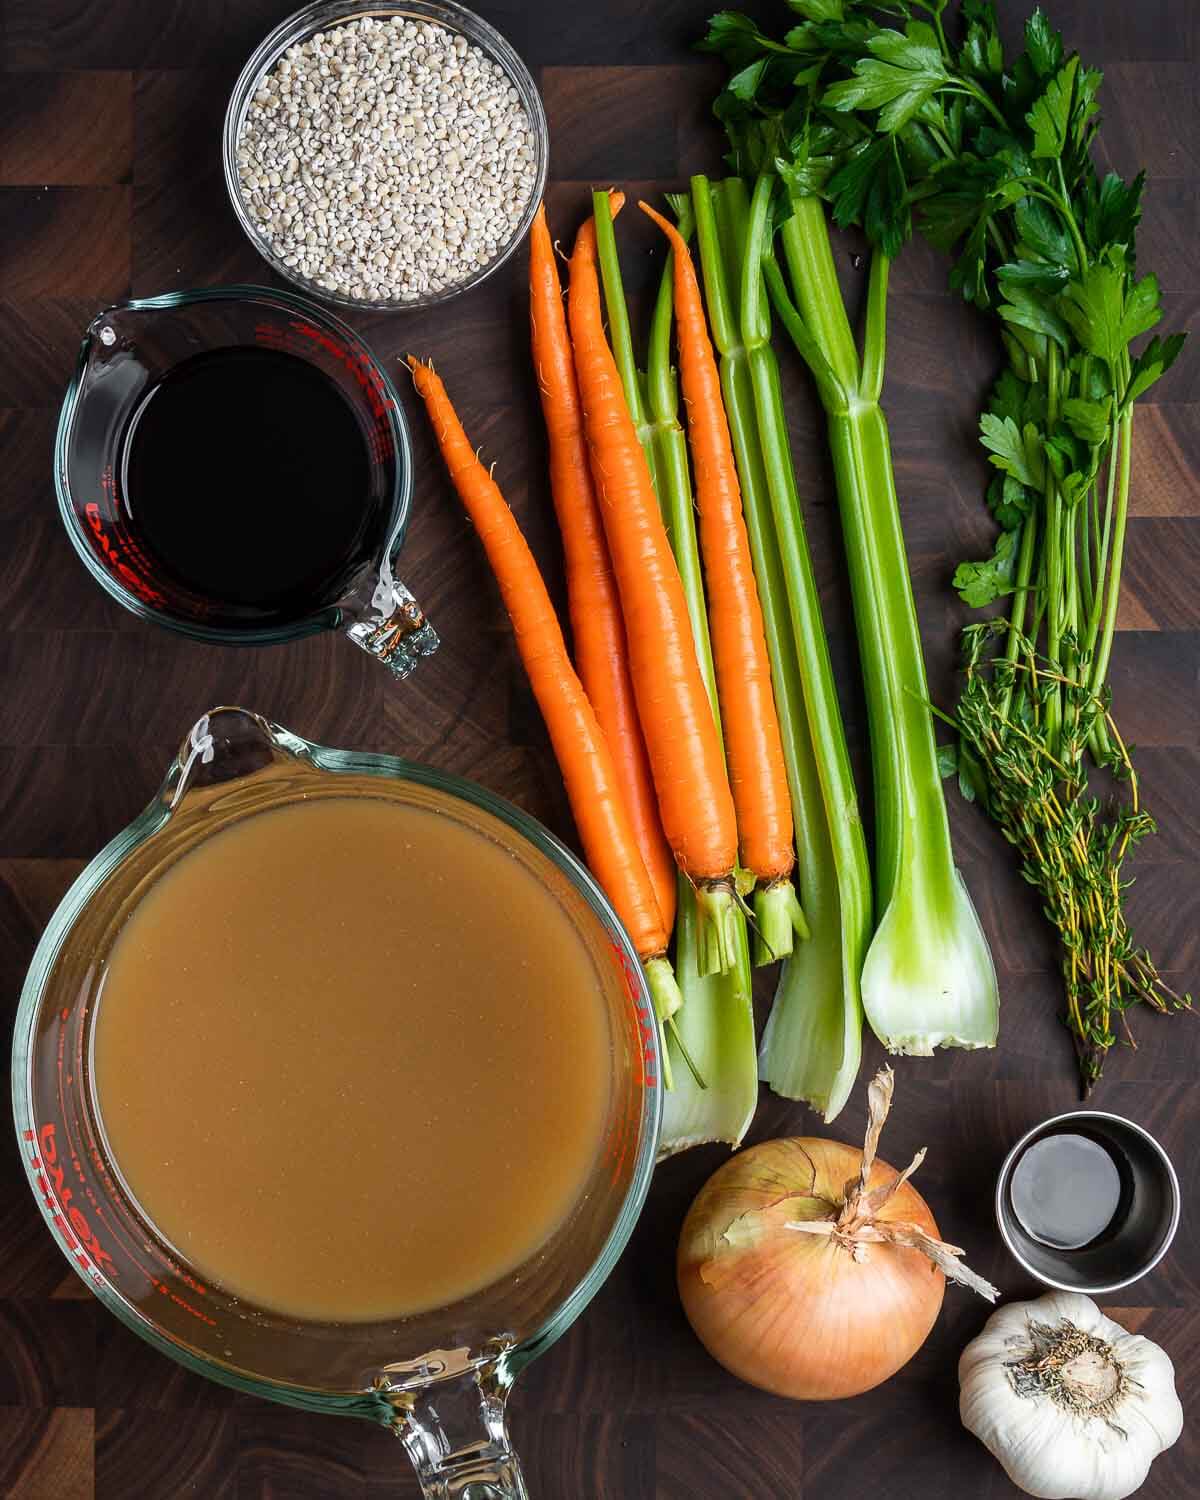 Ingredients shown: barley, red wine, carrots, celery, parsley, thyme, beef stock, onion, garlic, and worcestershire sauce.